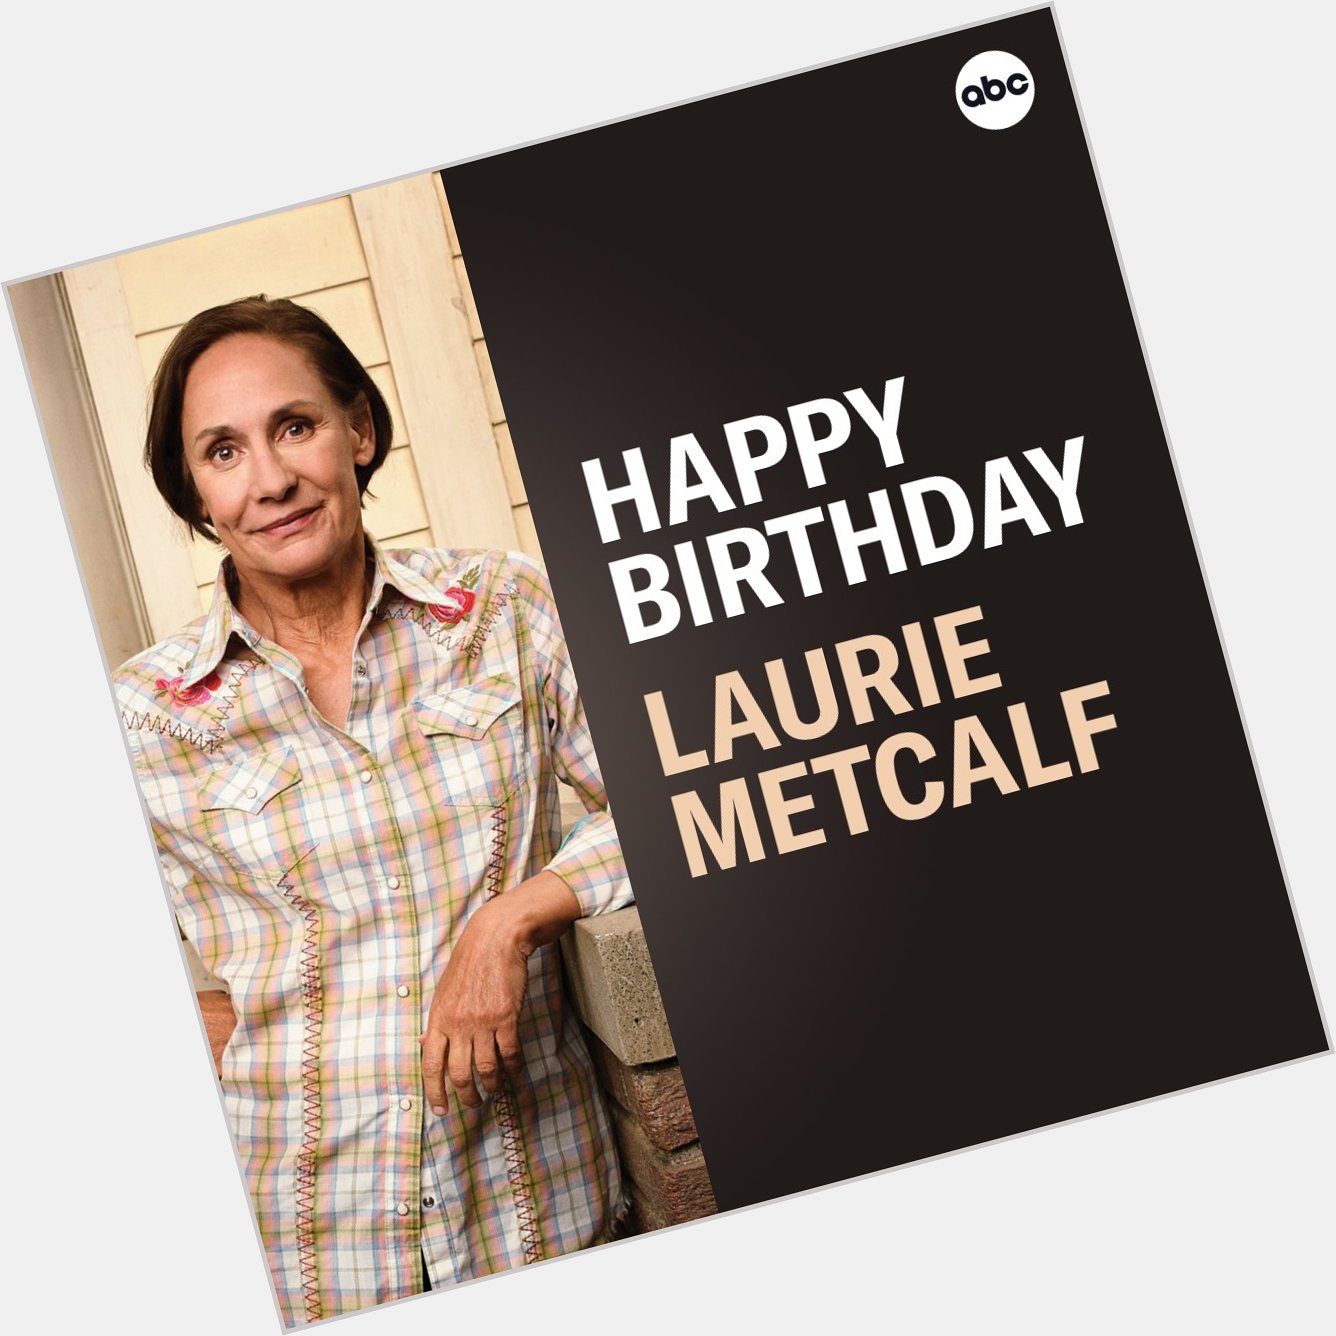 Happy Birthday to the comedy queen, herself Let s all show Laurie Metcalf some love in the comments! 